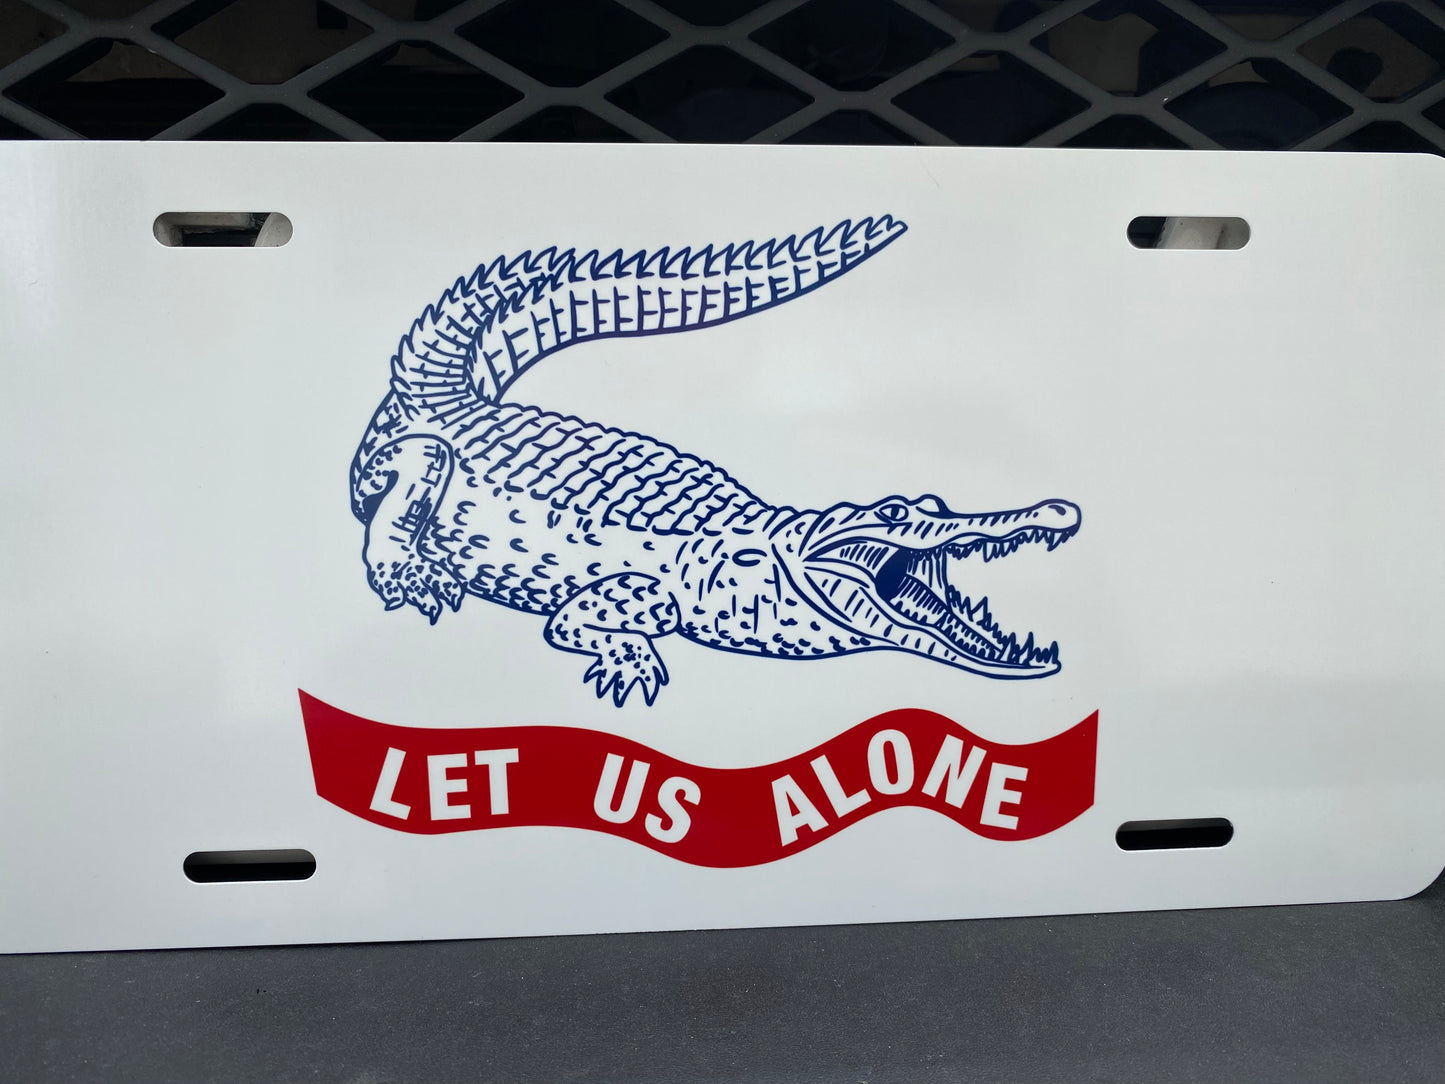 Let Us Alone - Florida Car Tag/Plate